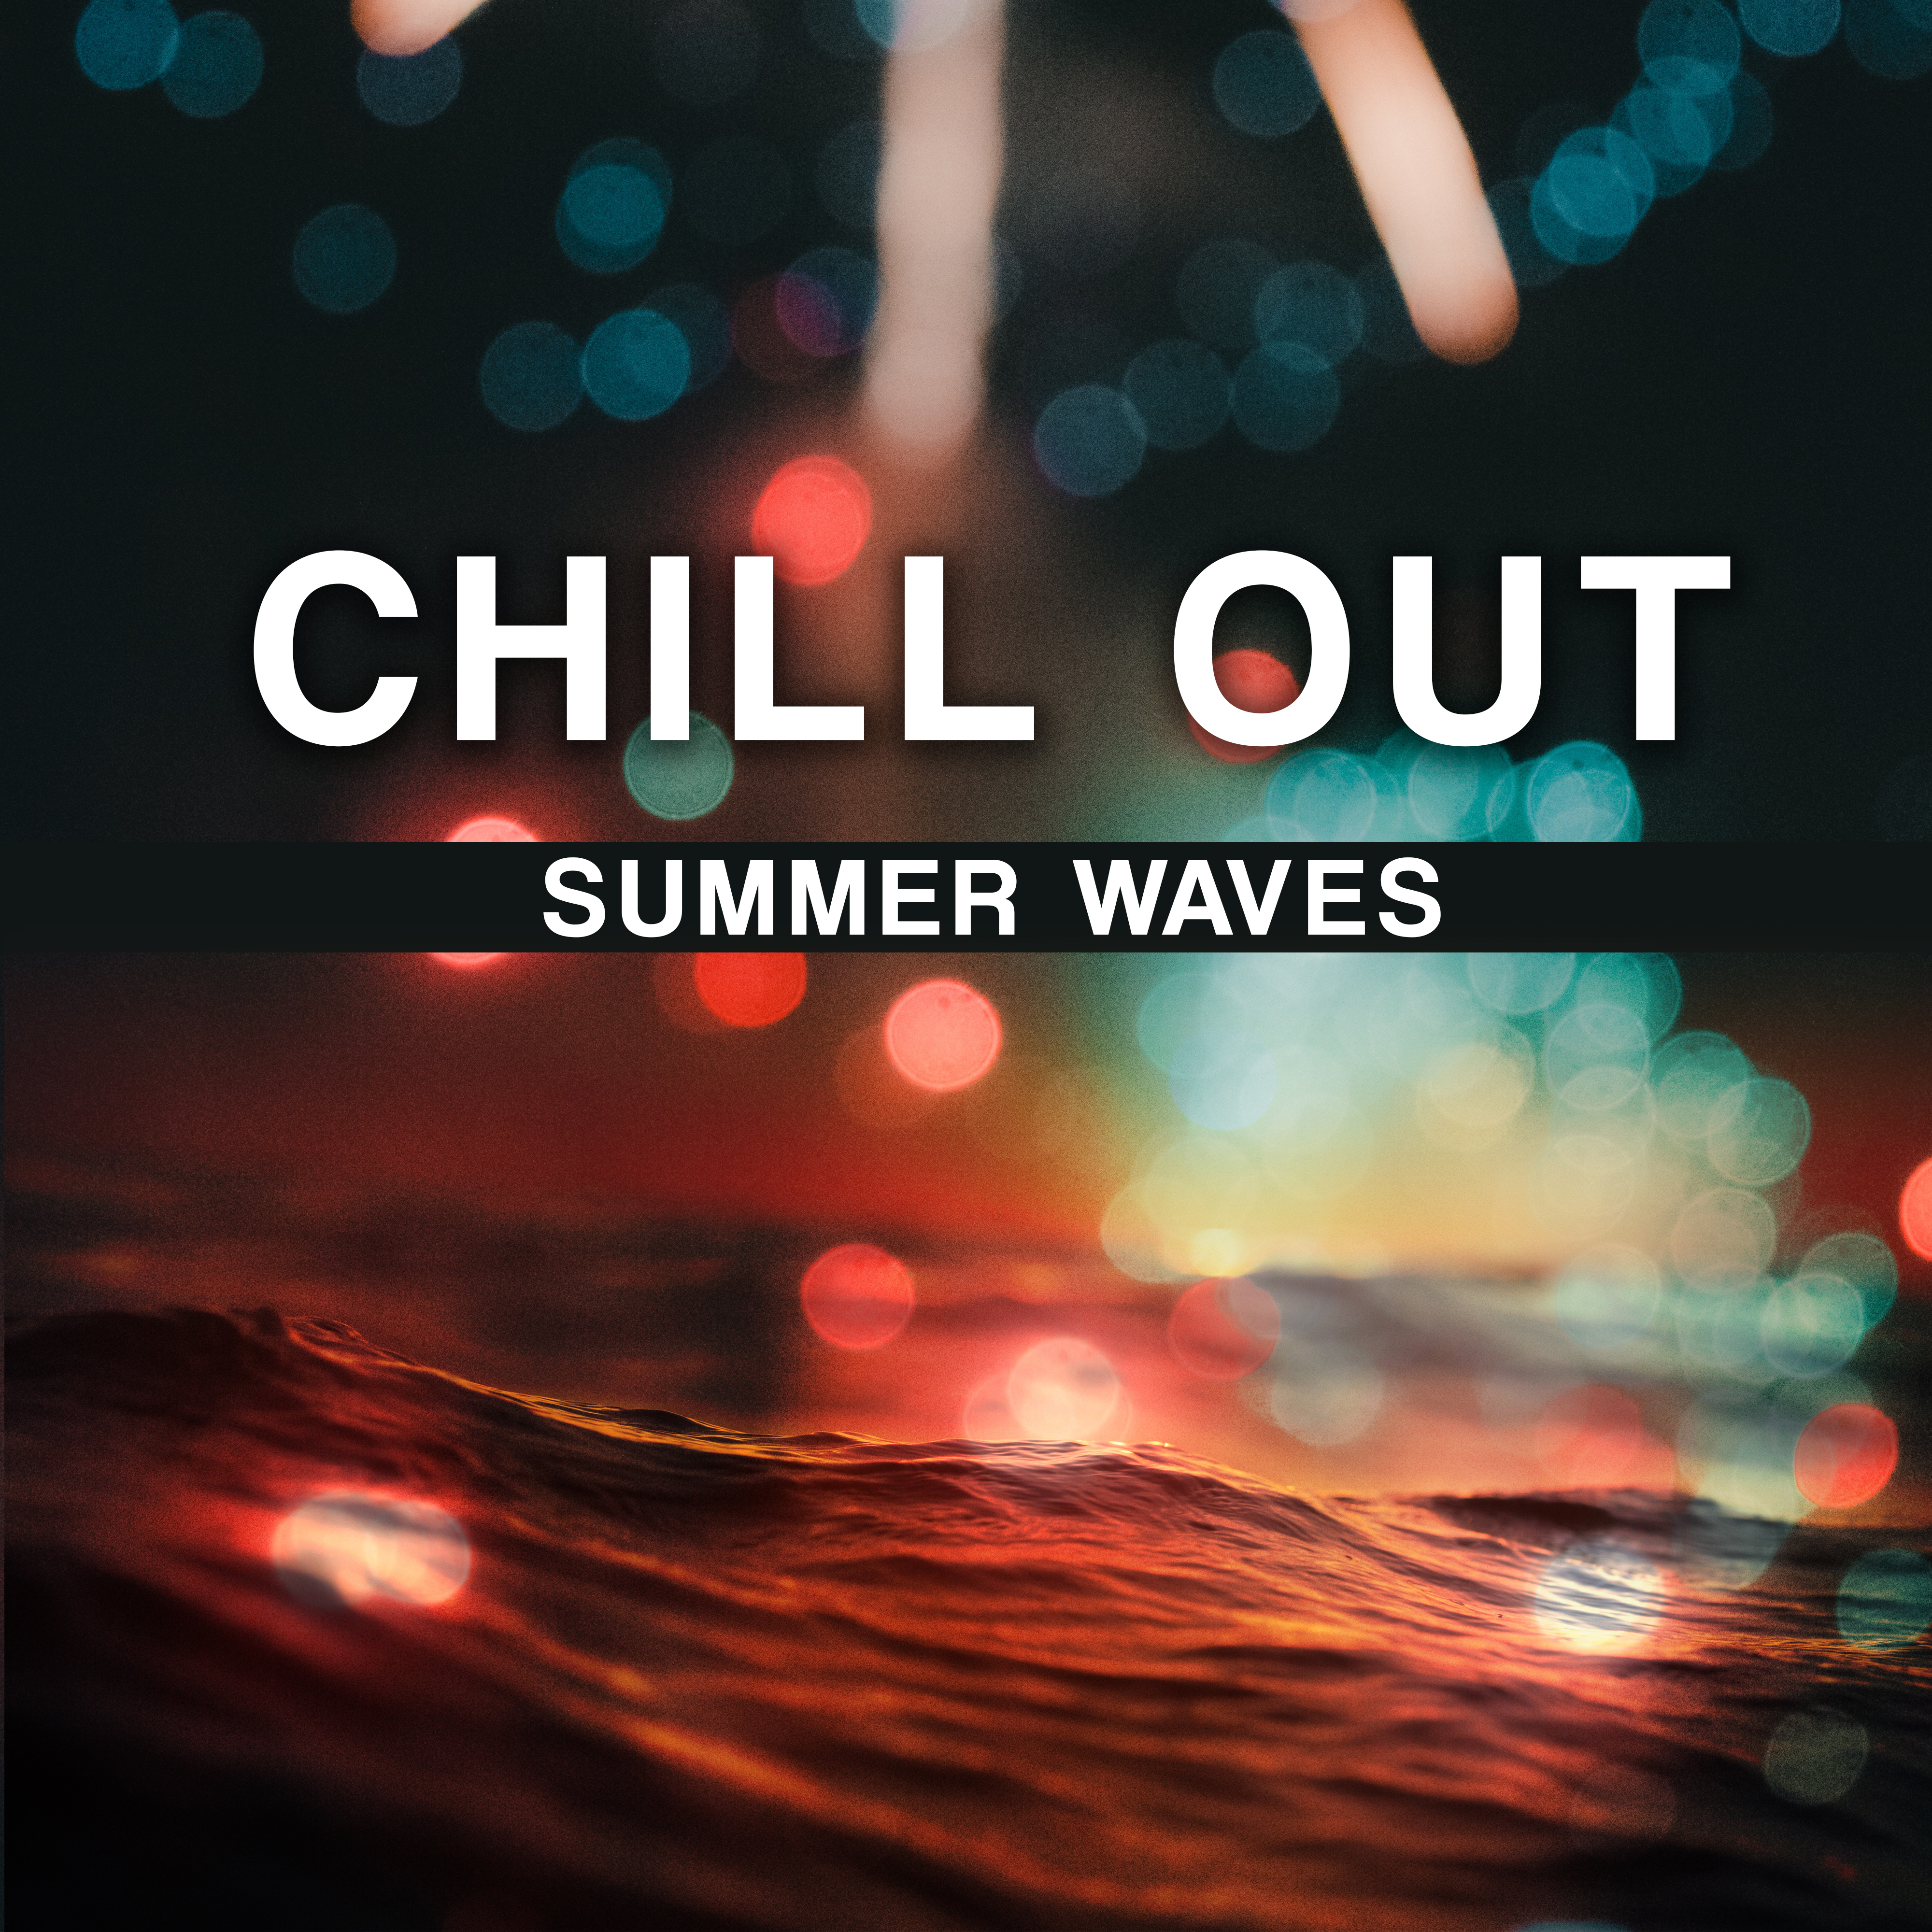 Chill Out Summer Waves